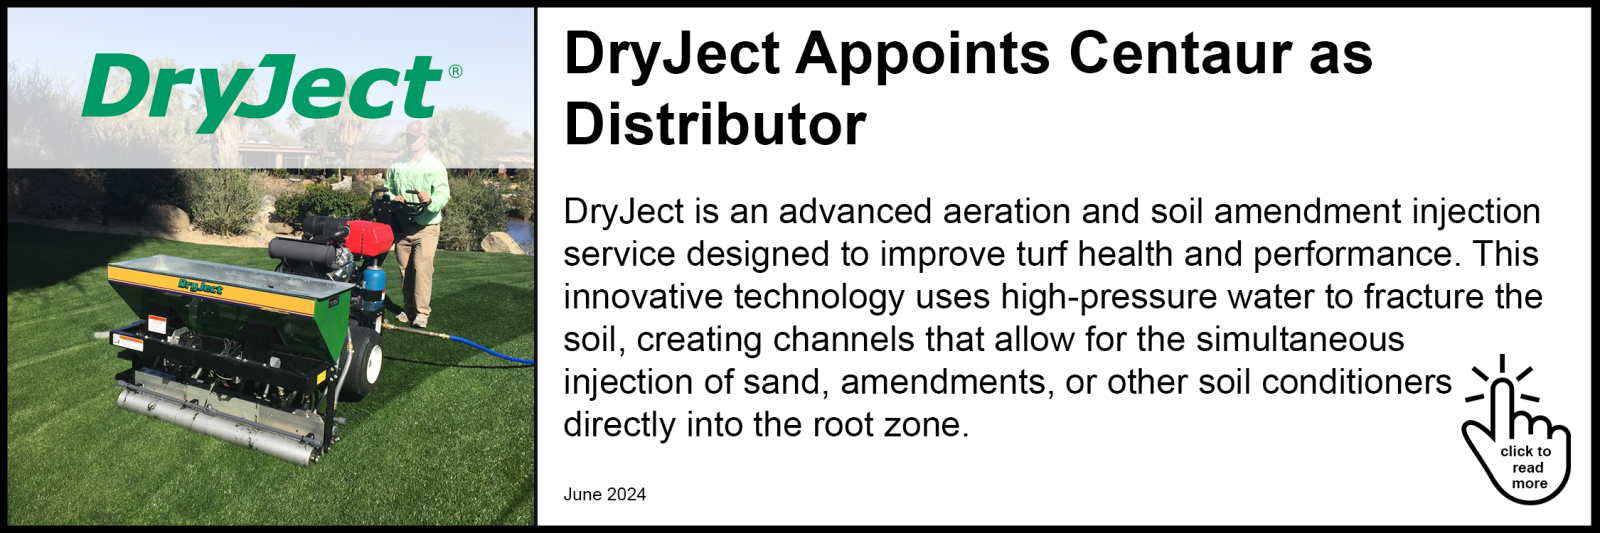 DryJect Appoints Centaur as Distributor